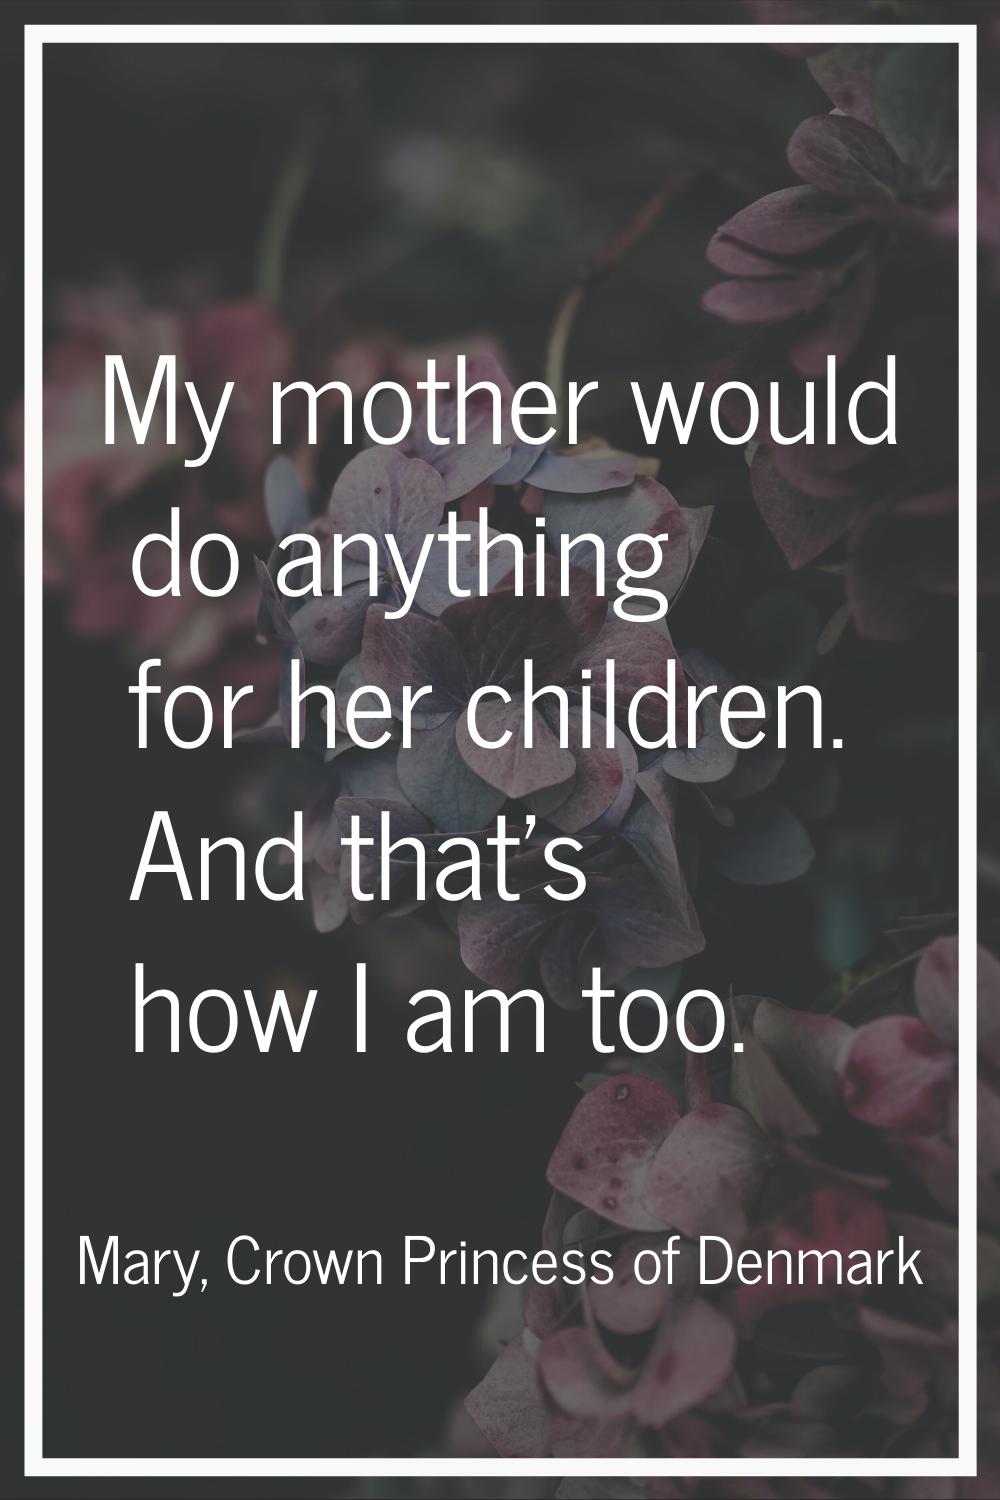 My mother would do anything for her children. And that's how I am too.